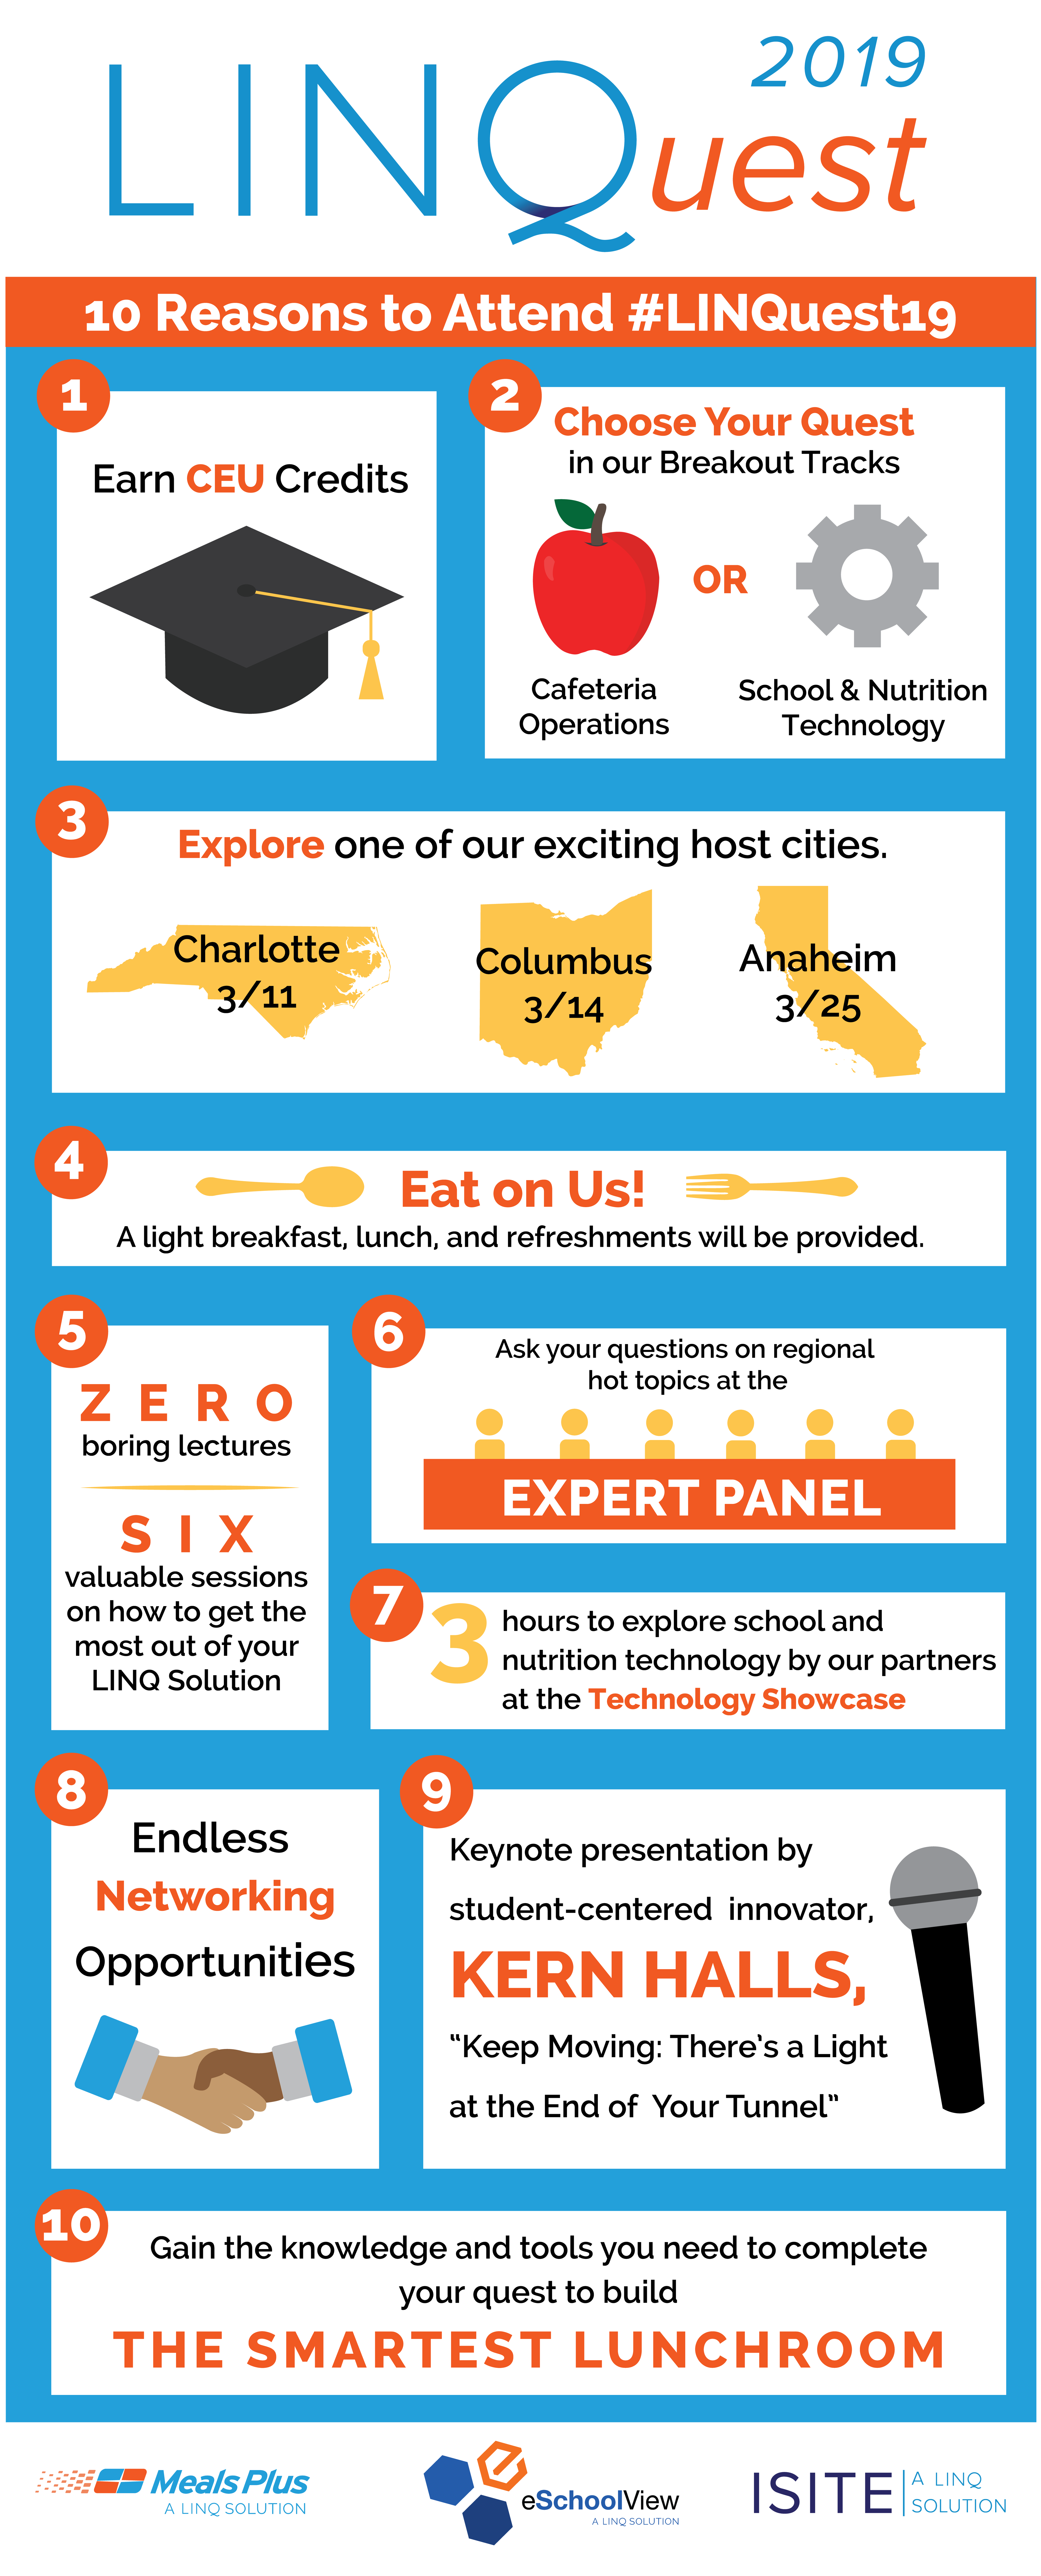 10 Reasons to Attend LINQuest 2019 Infographic